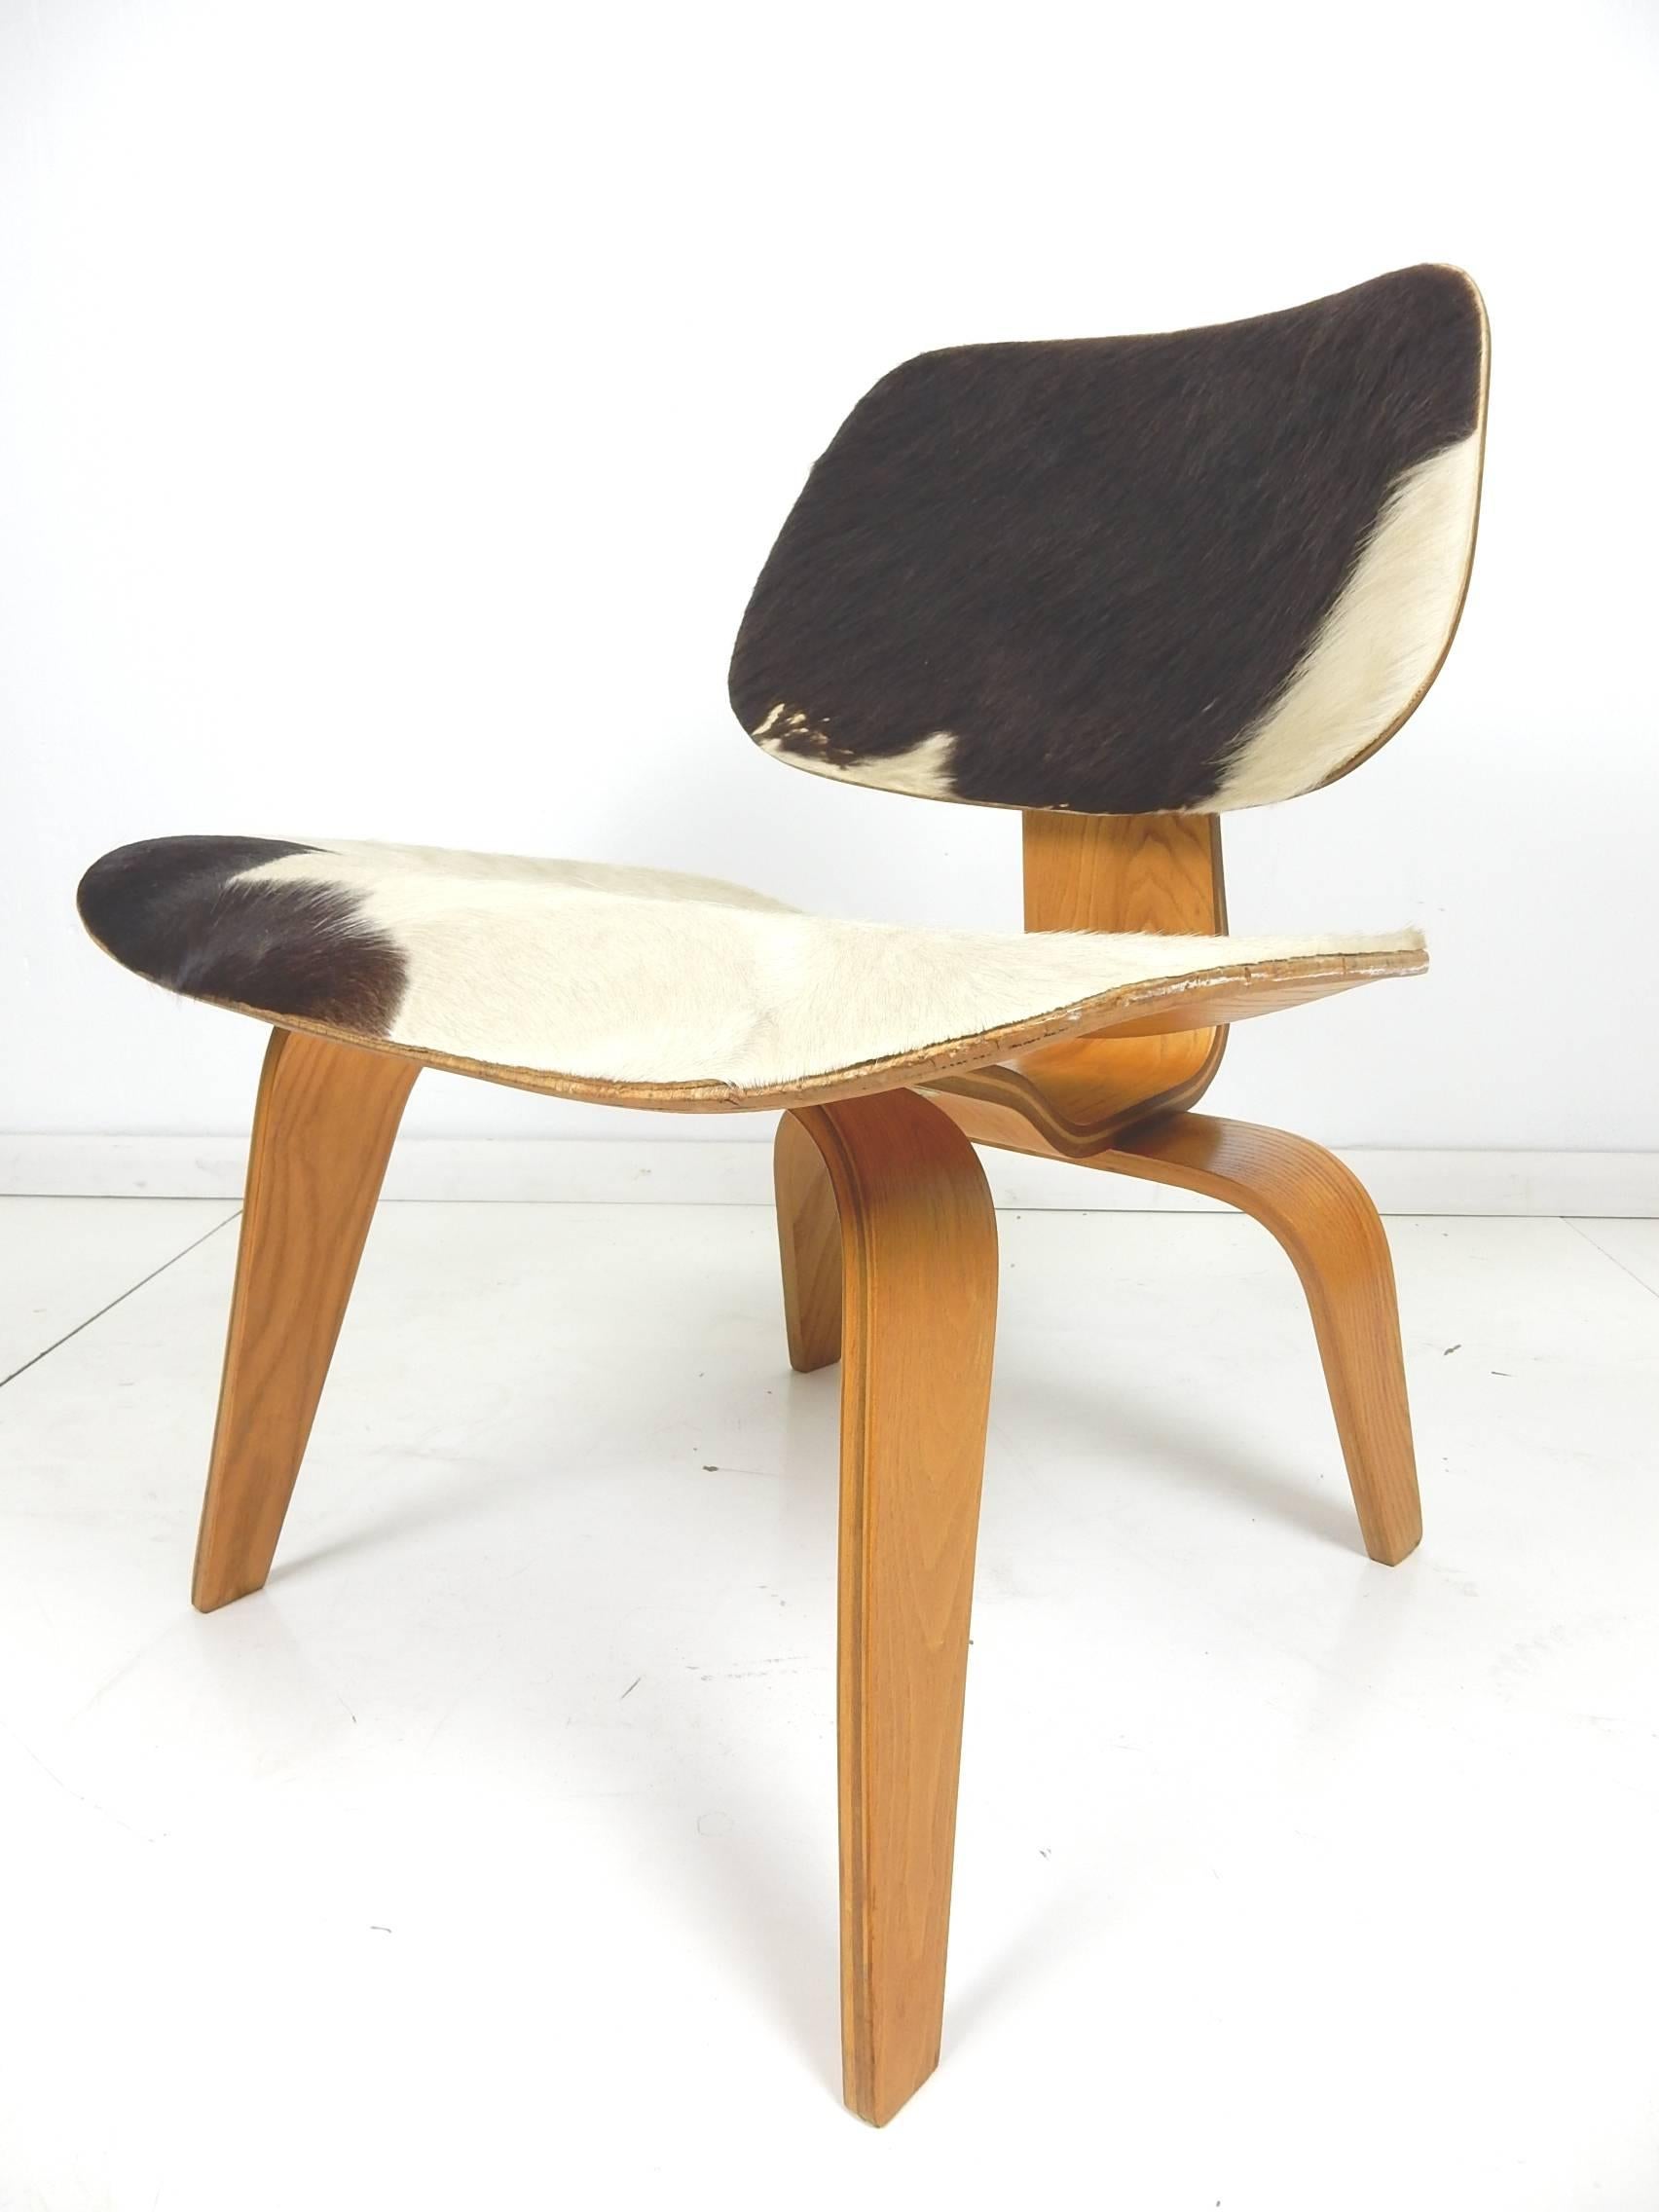 For the modernism collector this rare, circa 1948, LCW chair in original slunkskin finish.
This is a museum piece being completely original and in excellent condition.
Designed by Charles and Ray Eames for Evans Products and distributed by Herman